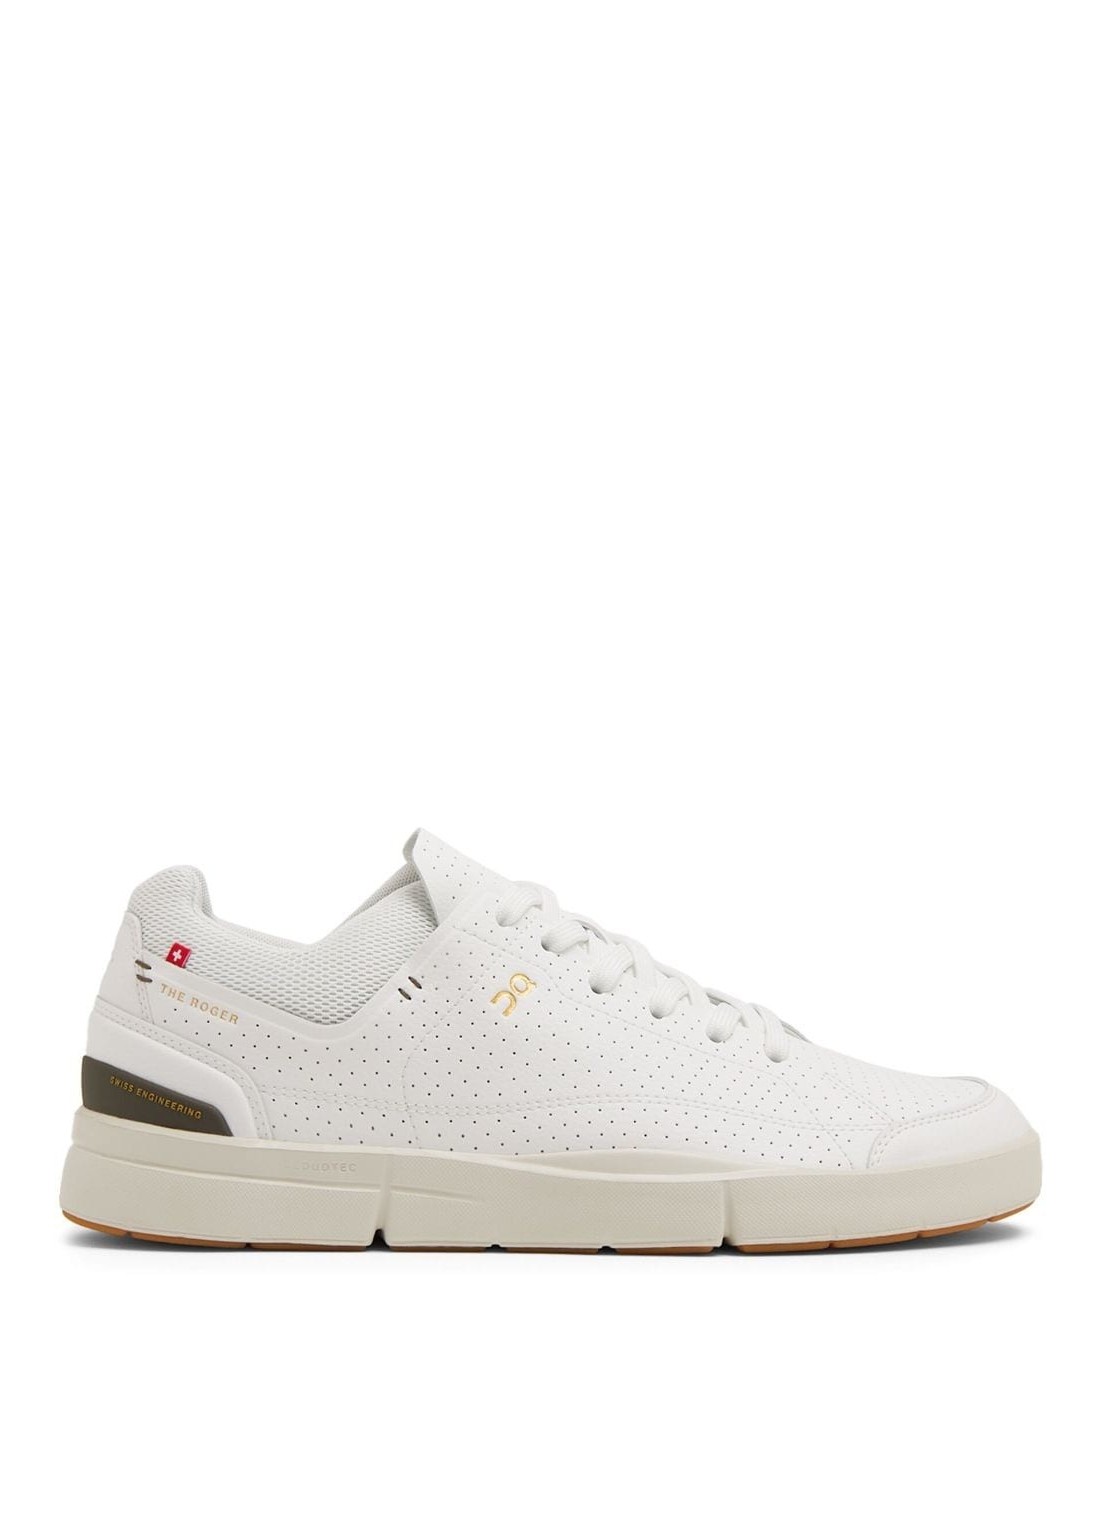 Sneaker on running the roger centre court - 3md30241528 white olive talla 45
 